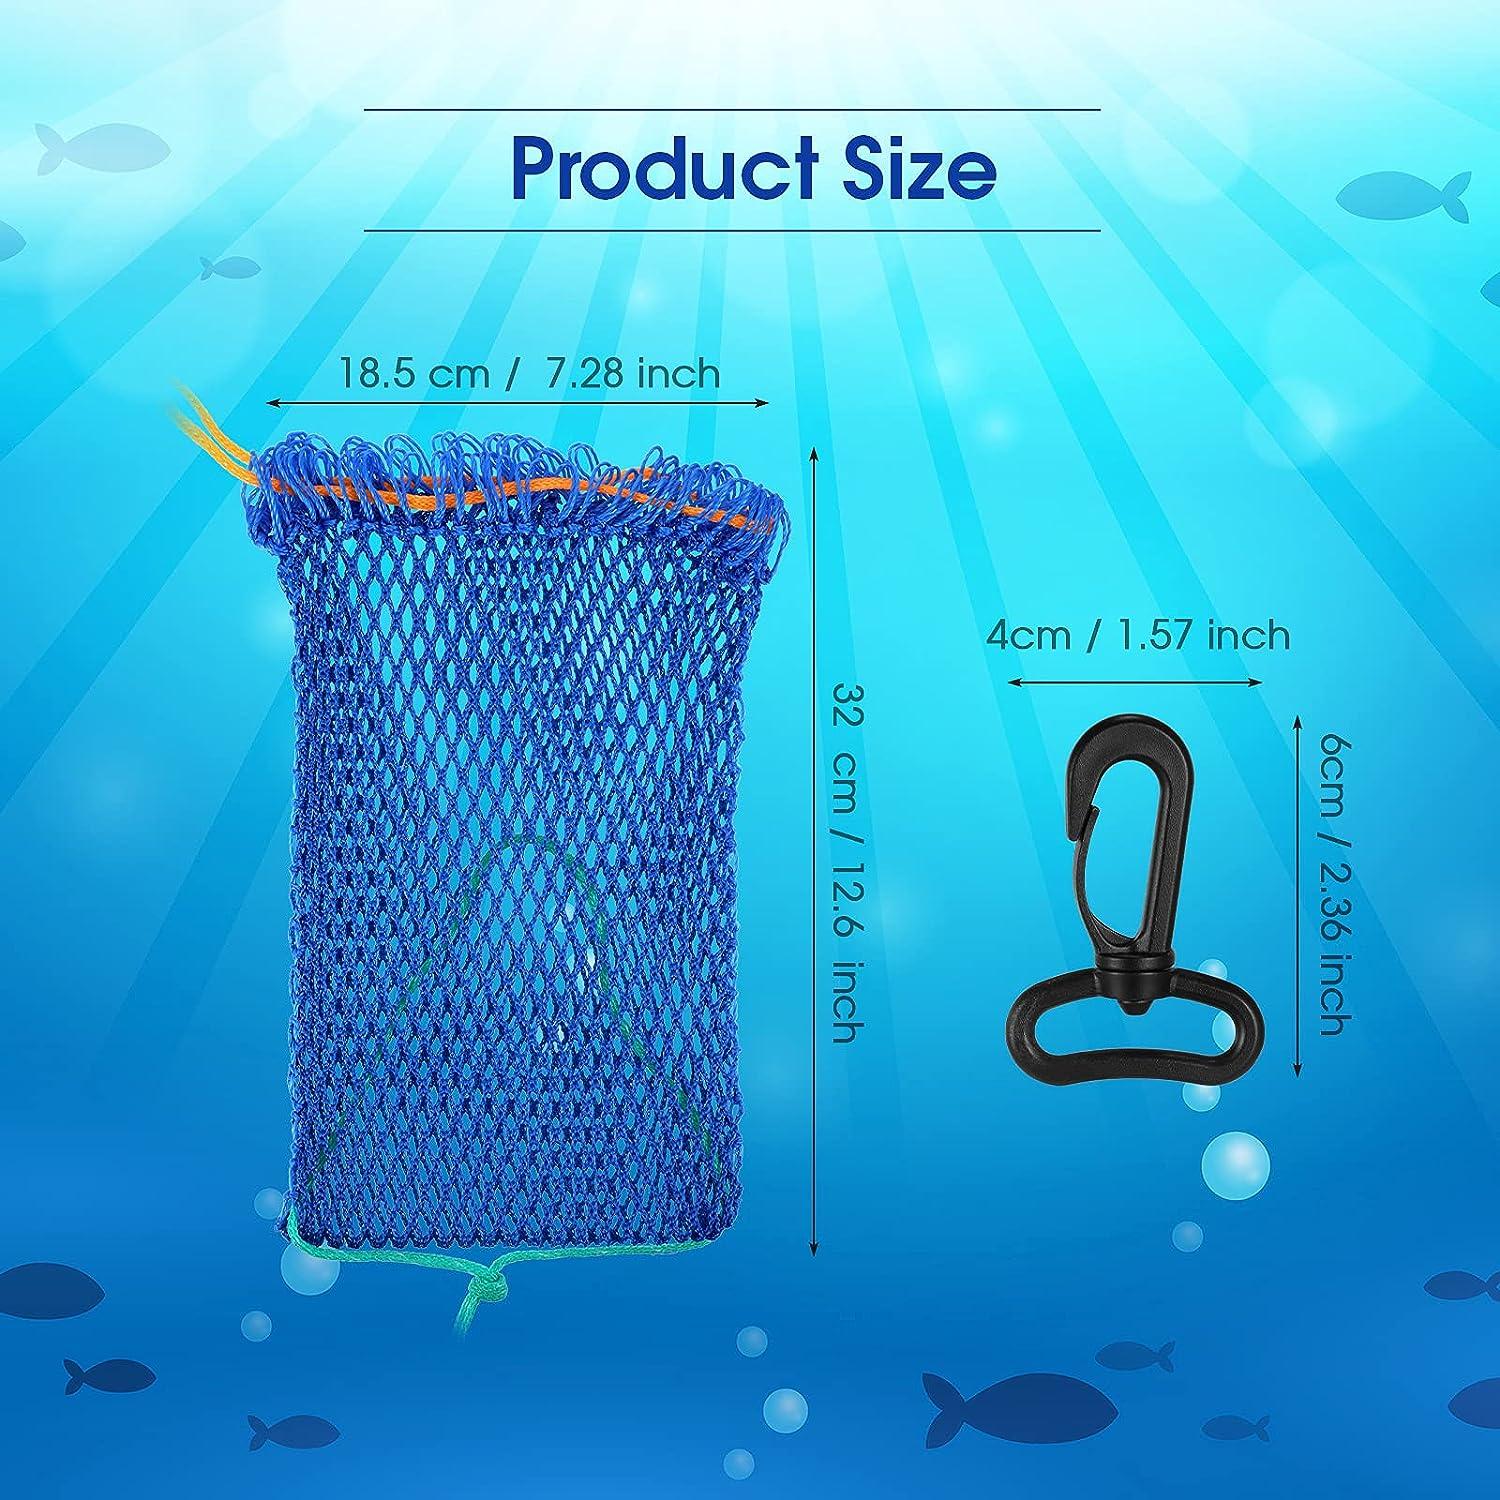 3 Pieces Crab Trap Bait Bags Outdoor Sports Style with 3 Pieces Rubber  Locker for Fishing Crab Traps Catch